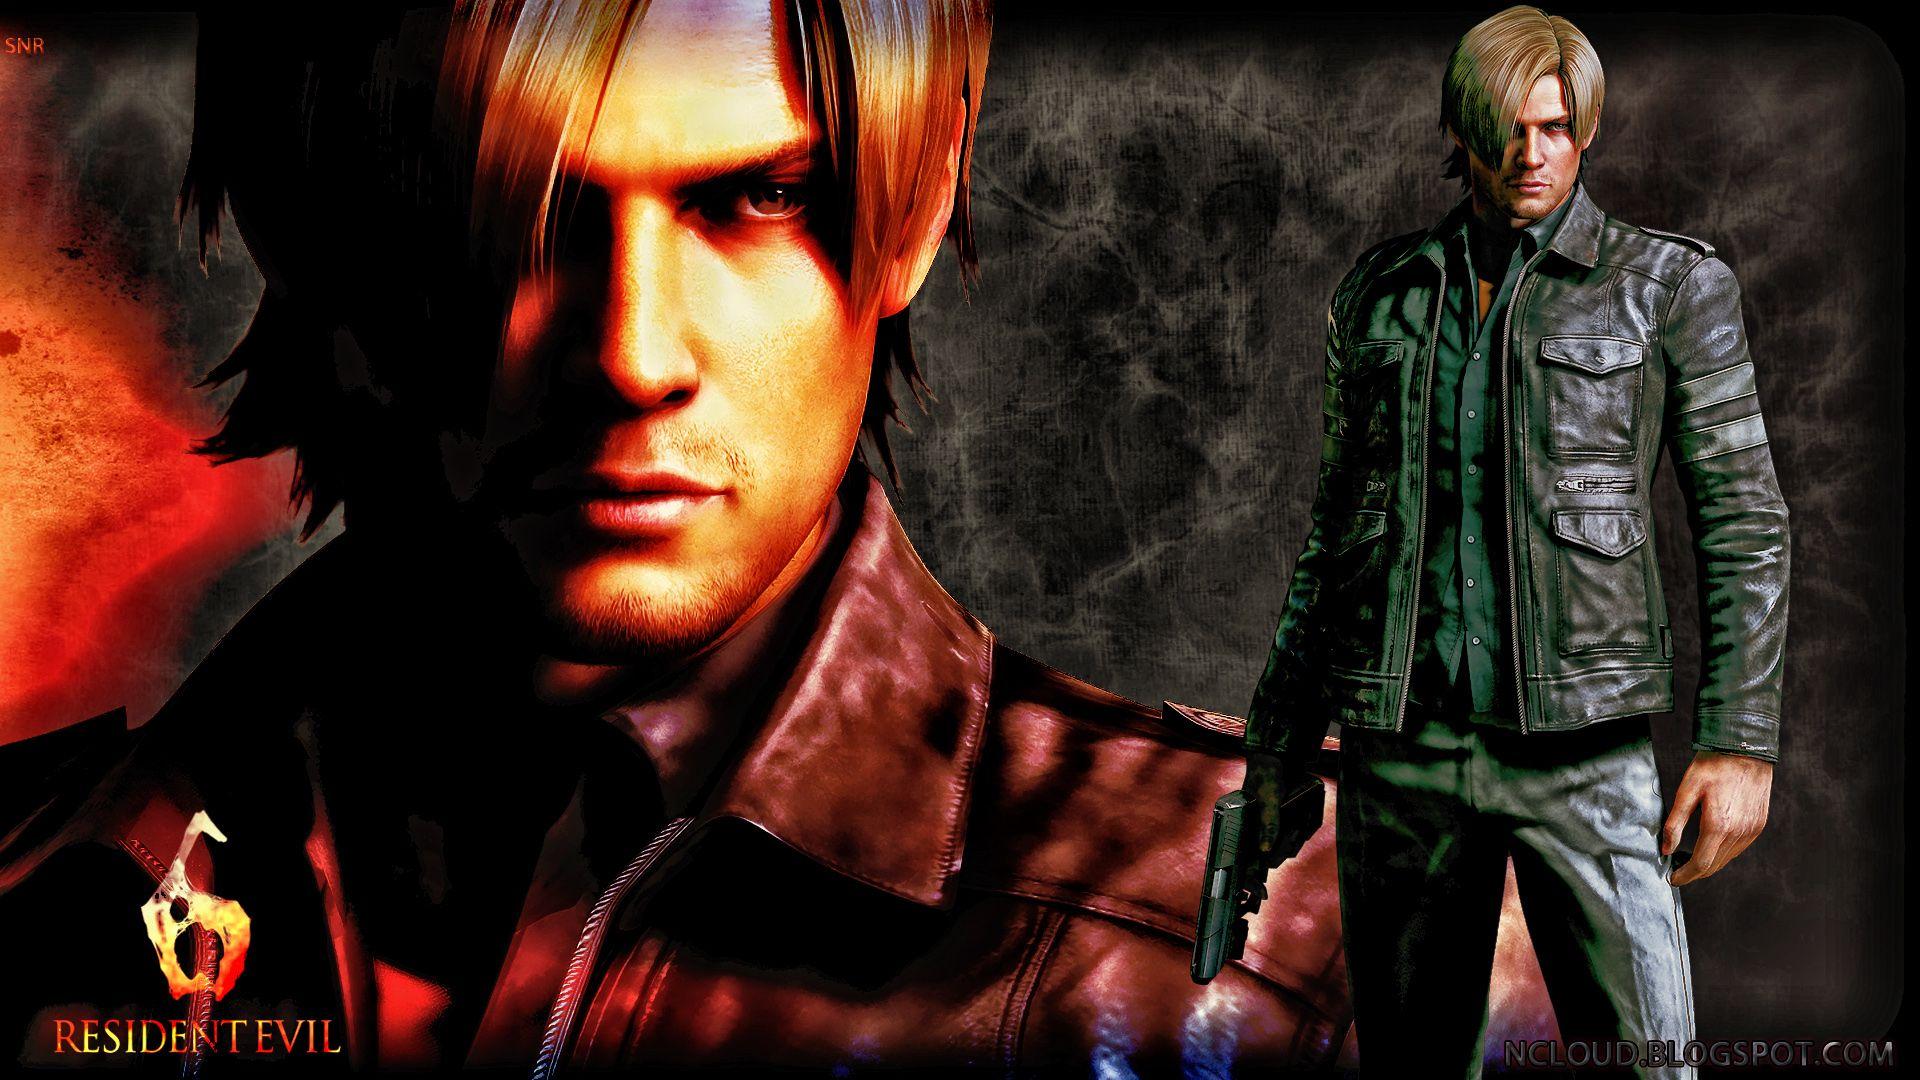 Games Movies Music Anime: My Resident Evil 6 Leon Wallpaper